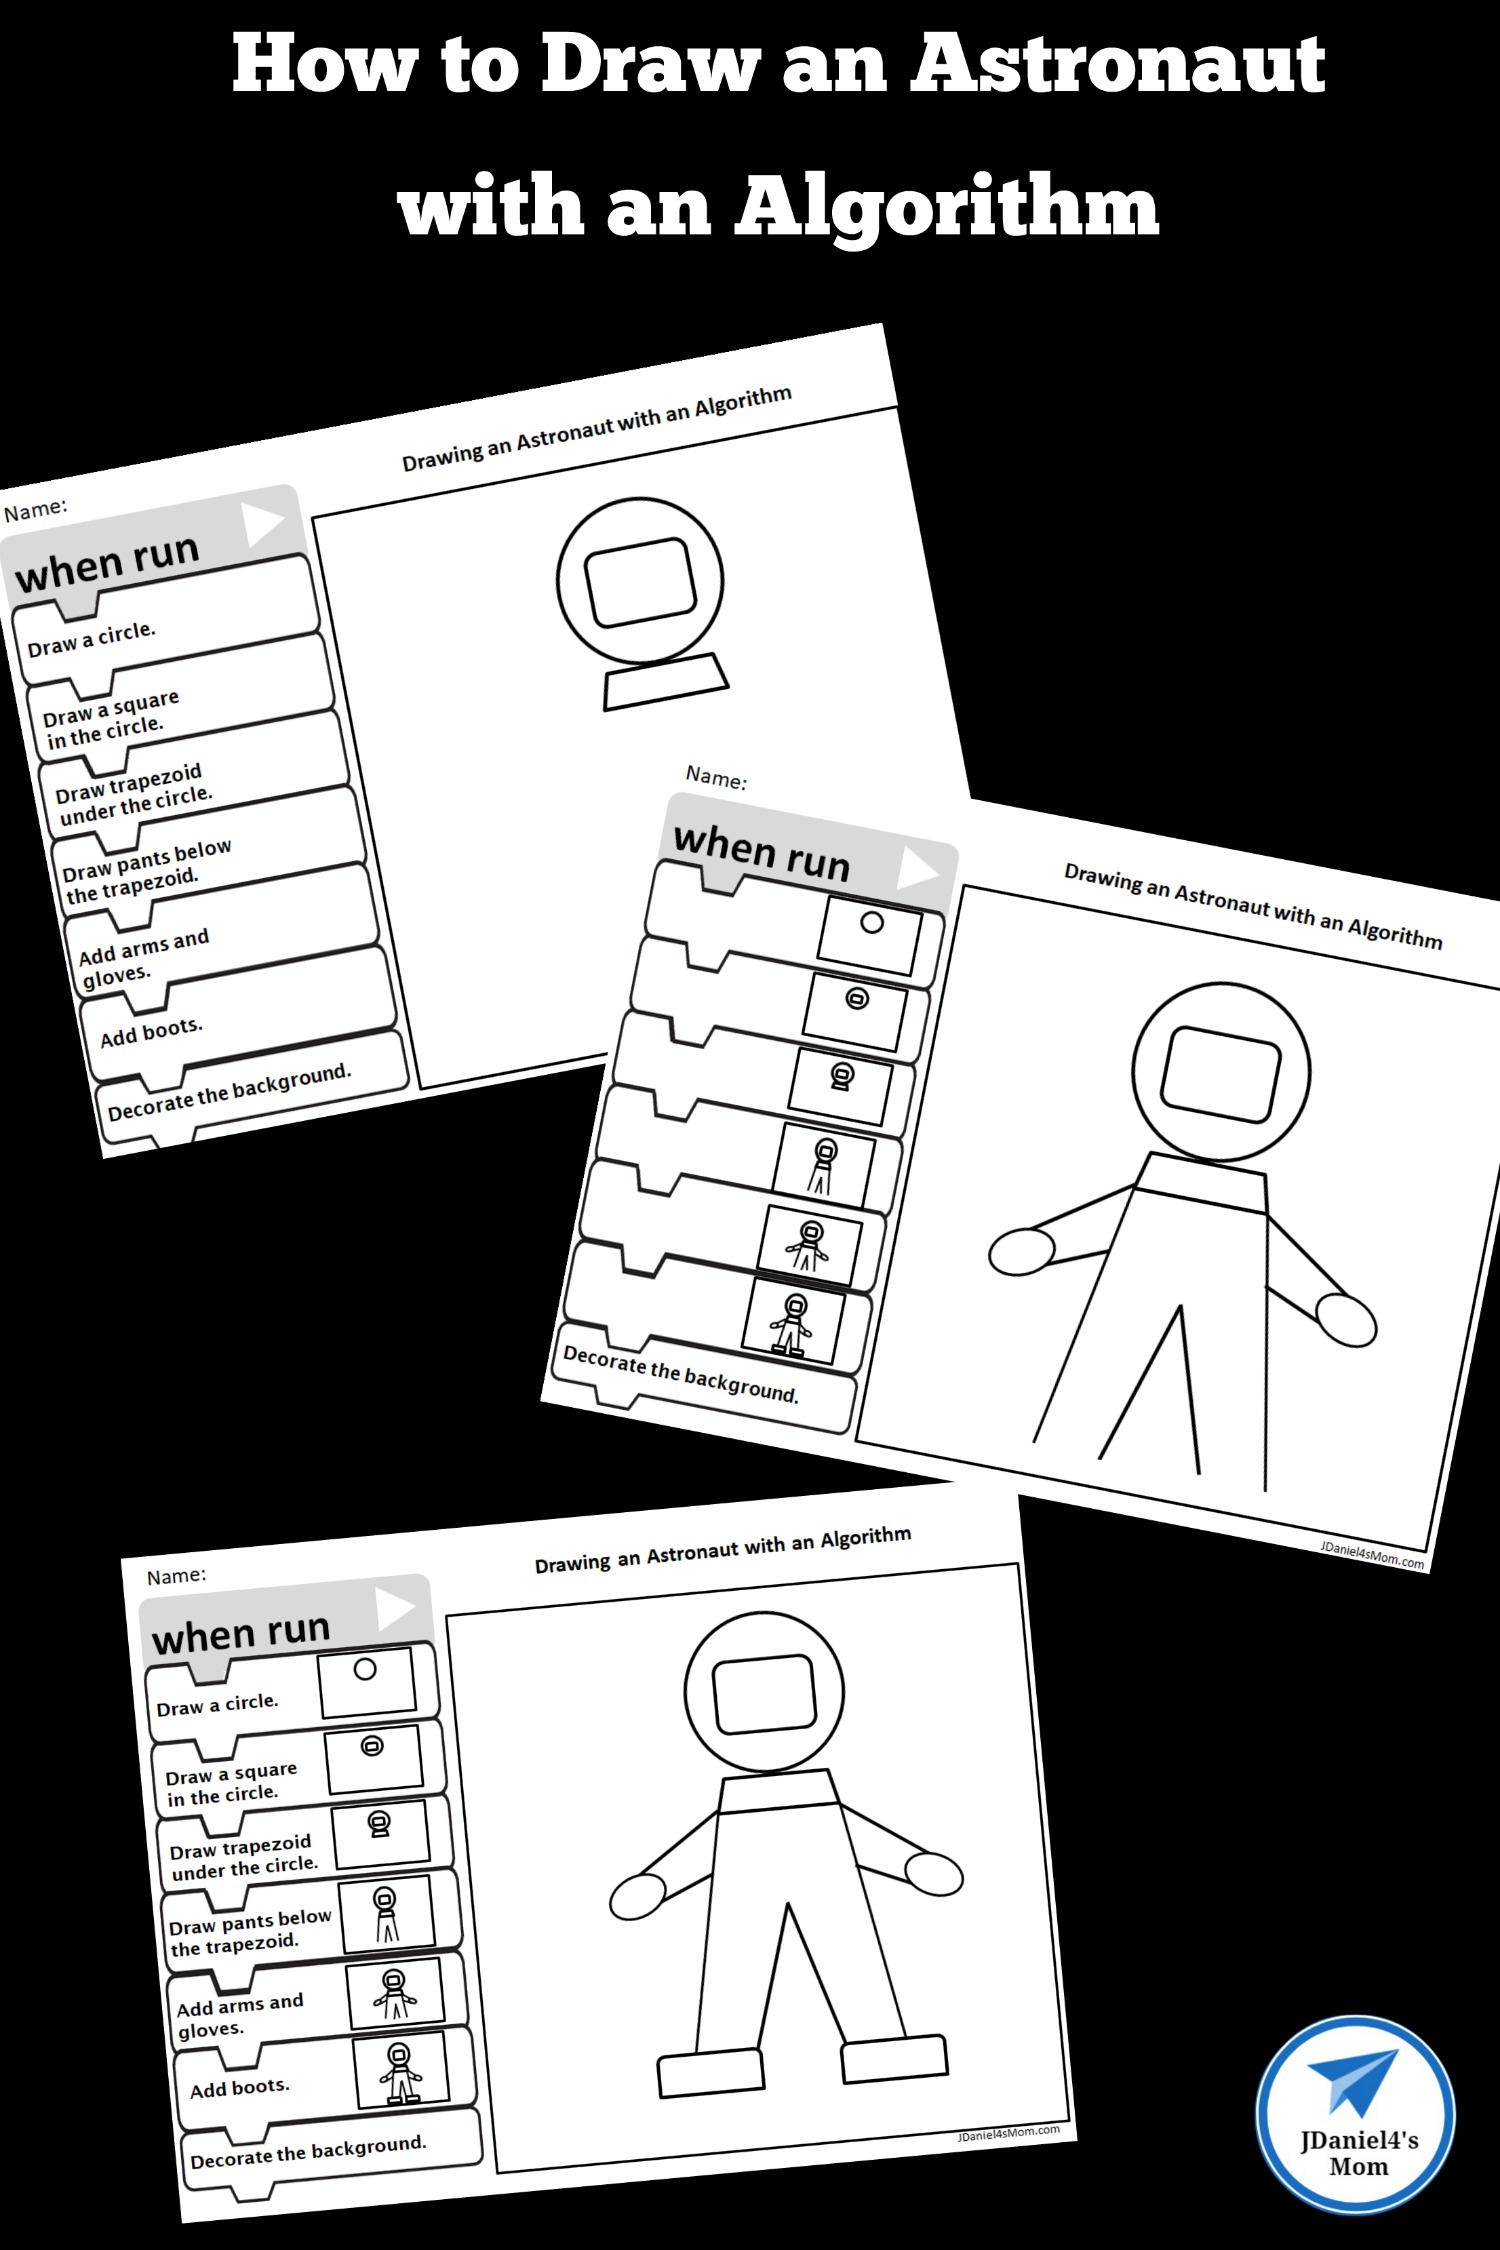 Your children will have fun exploring how an algorithm works and learning how to draw an astronaut. There are three versions of this free printable worksheet in the set. #coding #algorithm #space #astronaut #howtodrawanastronaut #coloringpage #jdaniel4smom 